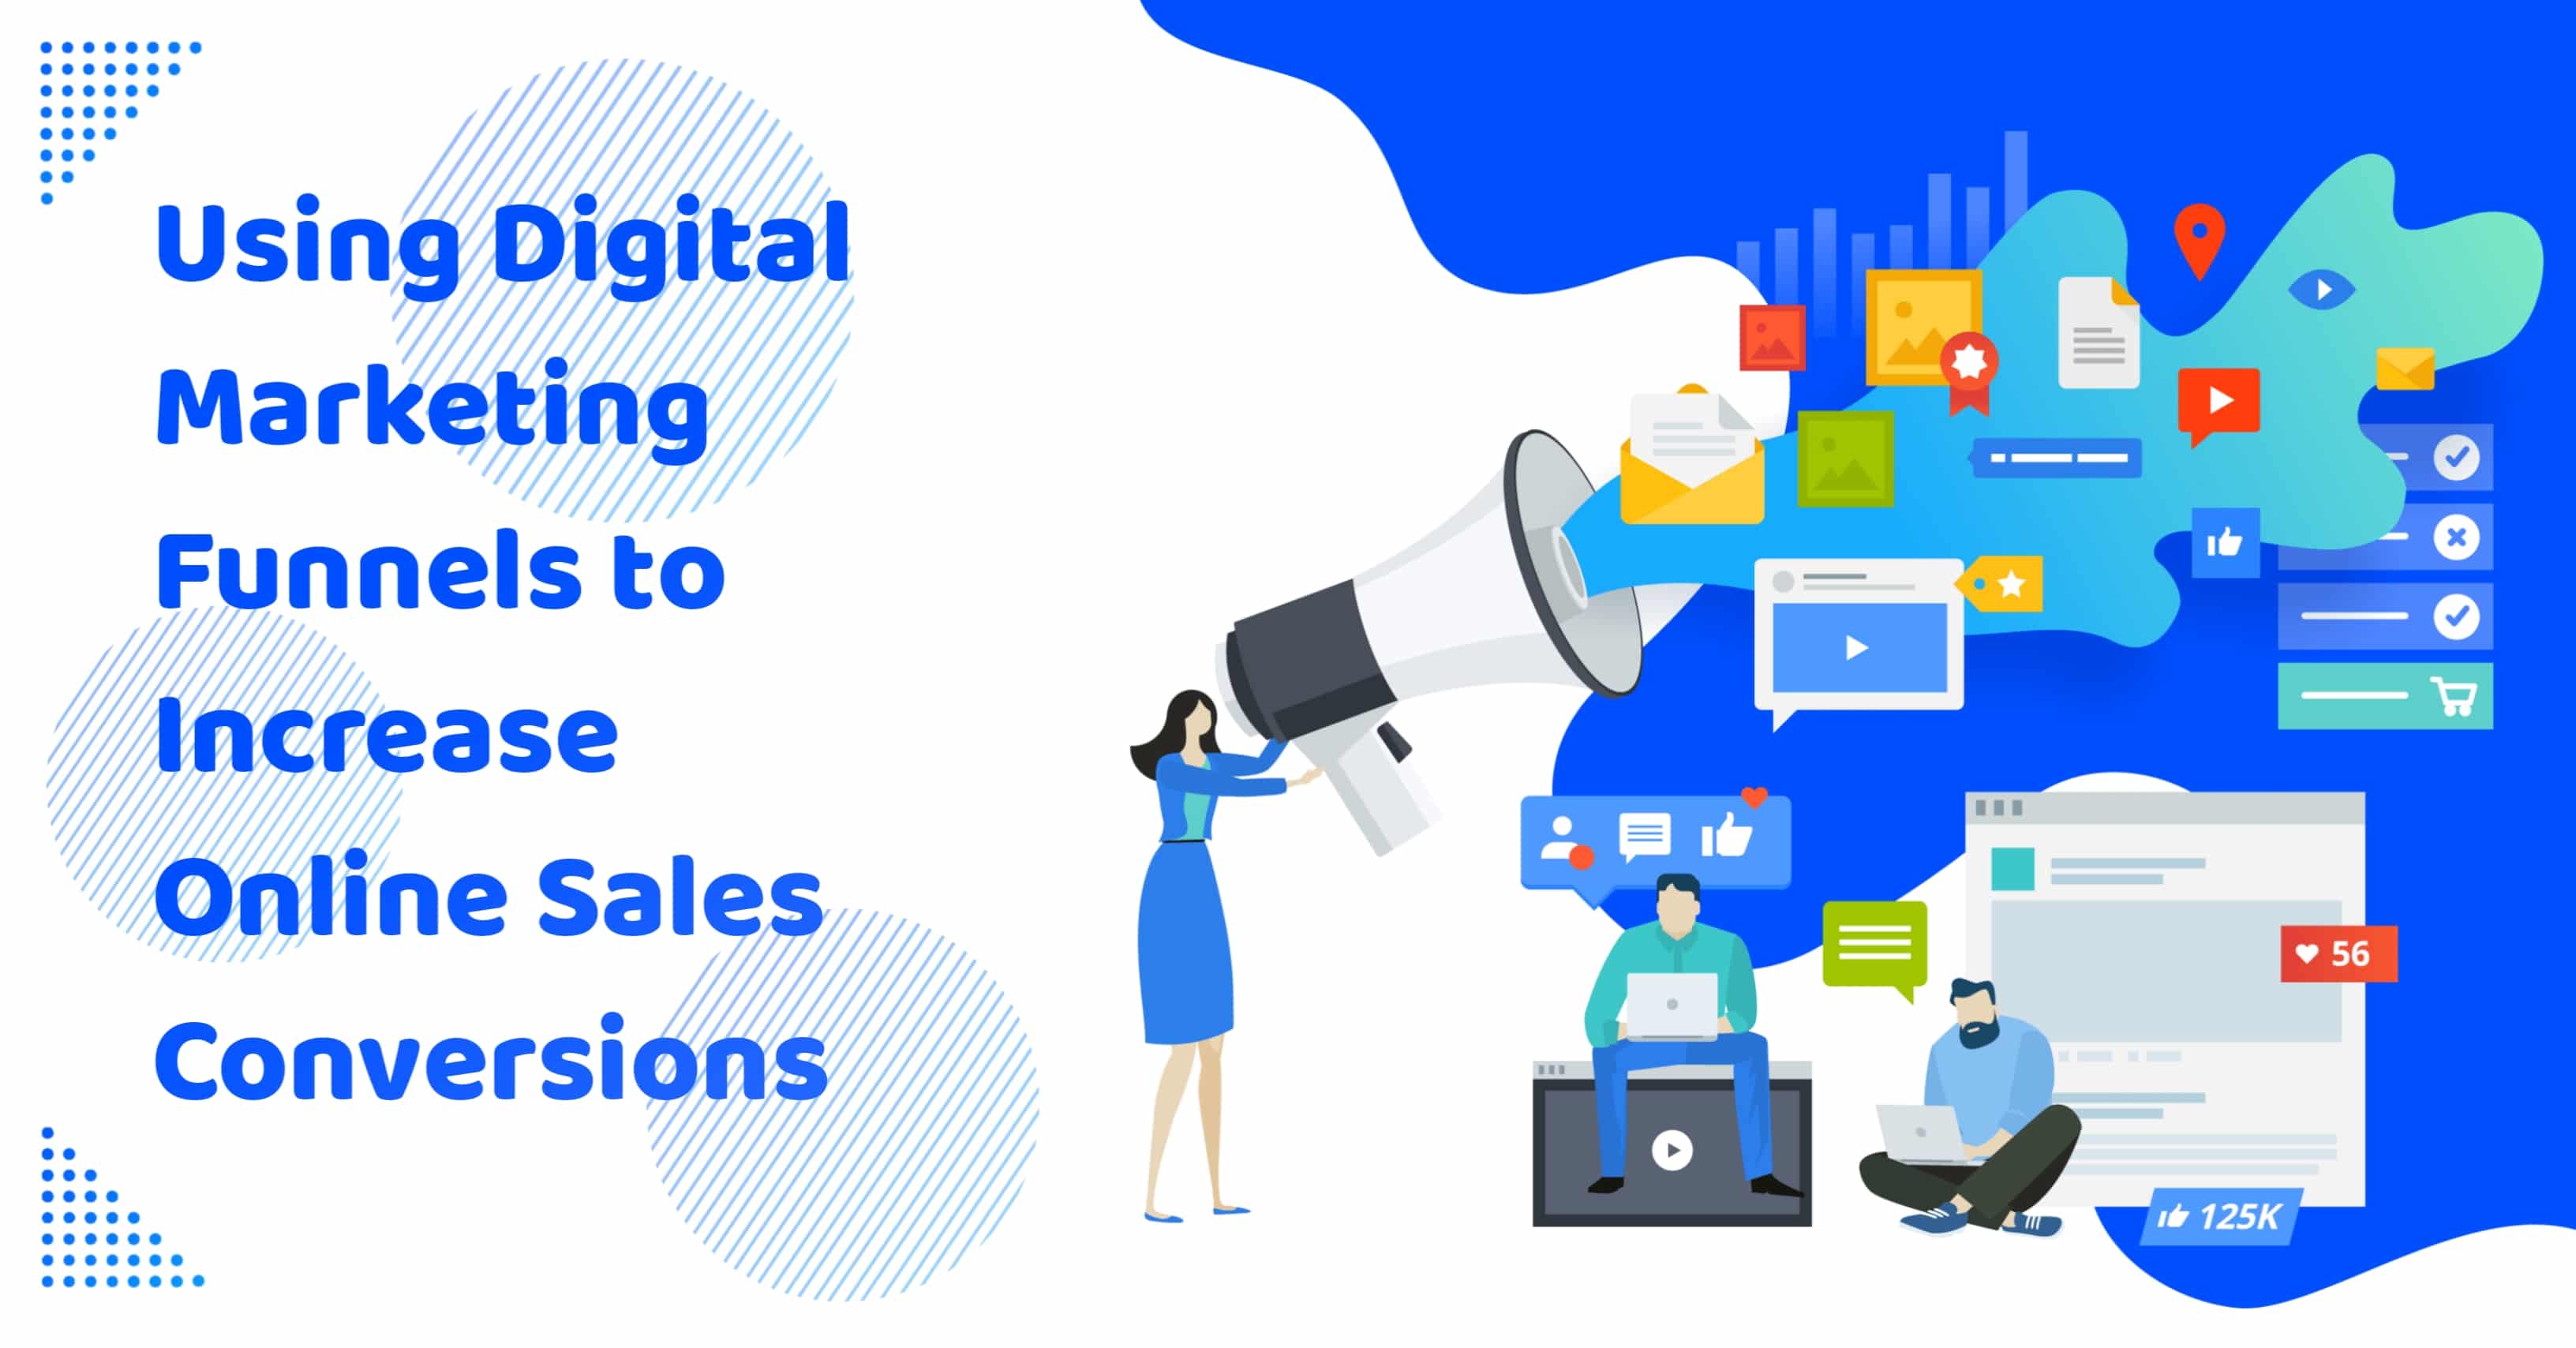 Using Digital Marketing Funnels to Increase Online Sales Conversions